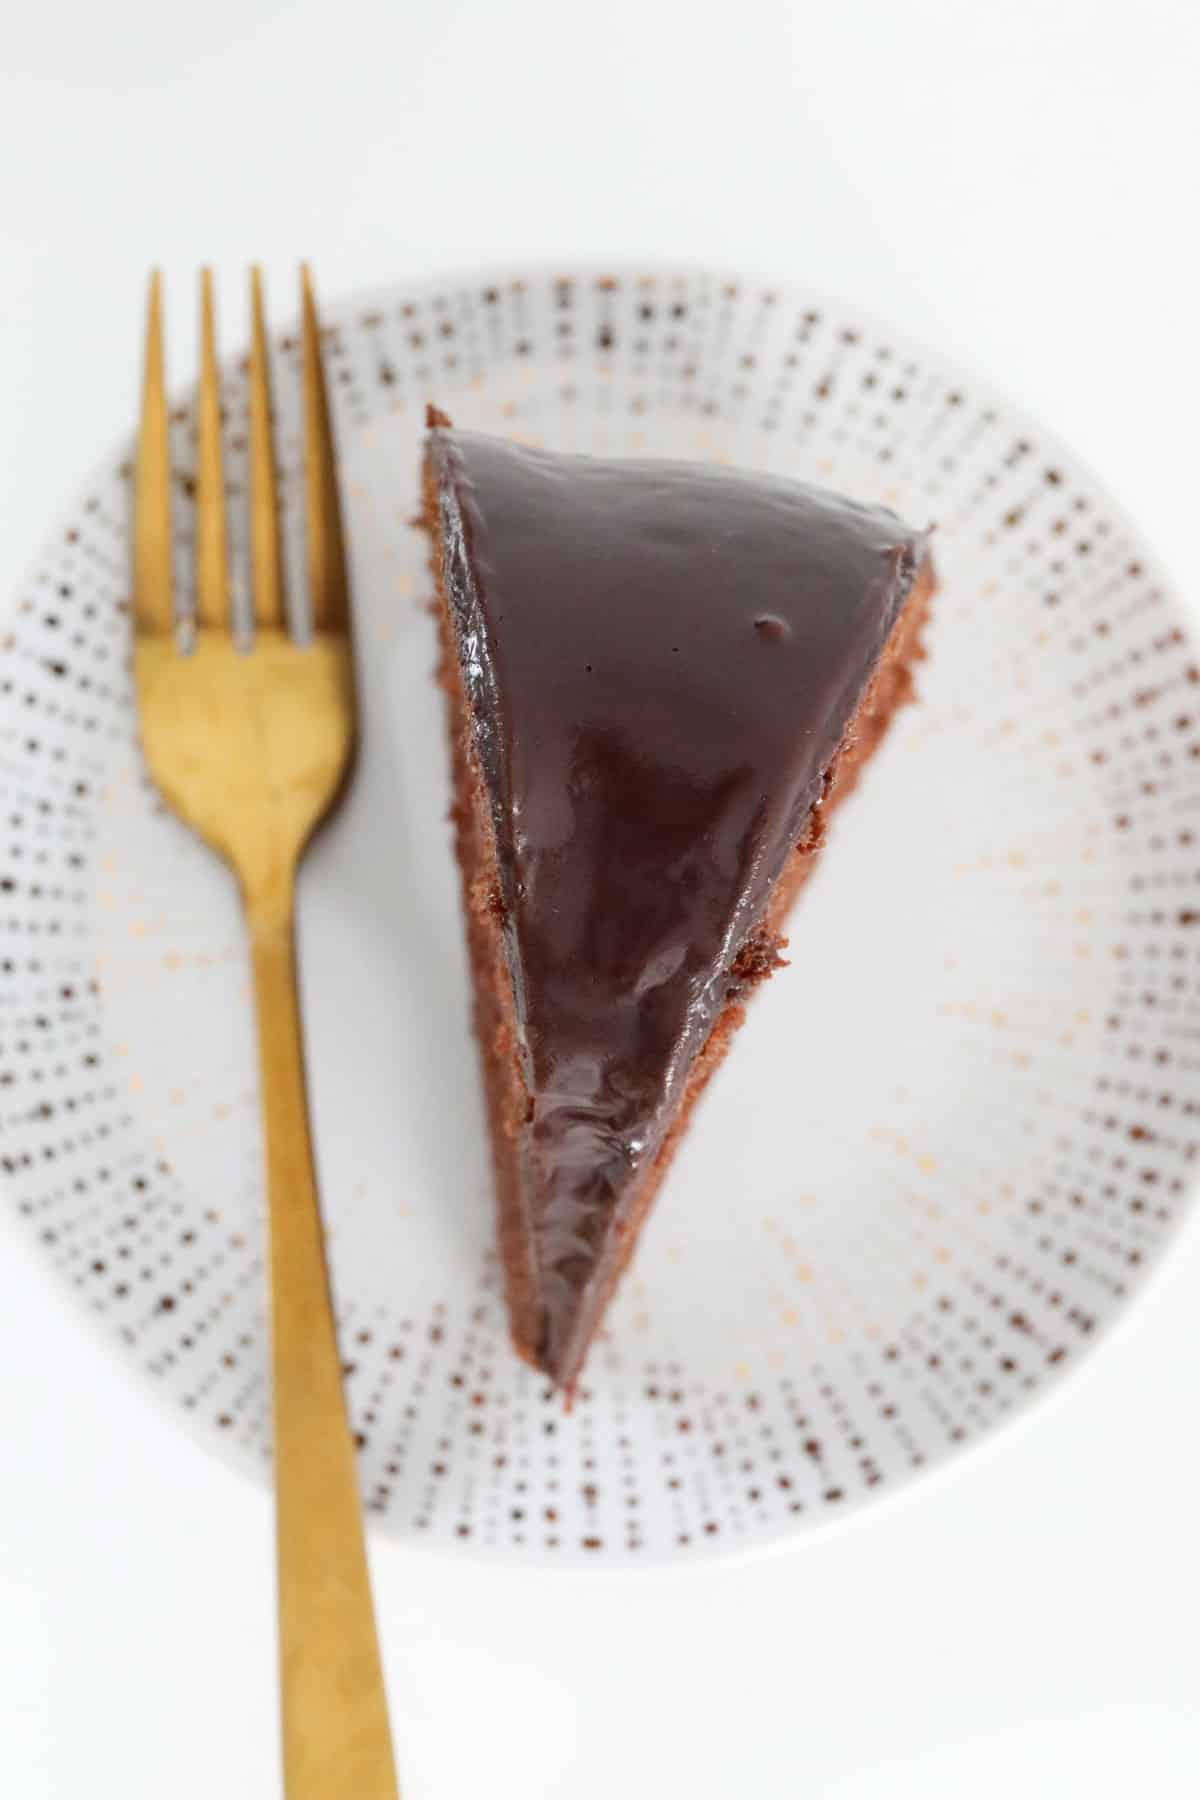 A serve of chocolate pound cake on a plate with a gold fork.